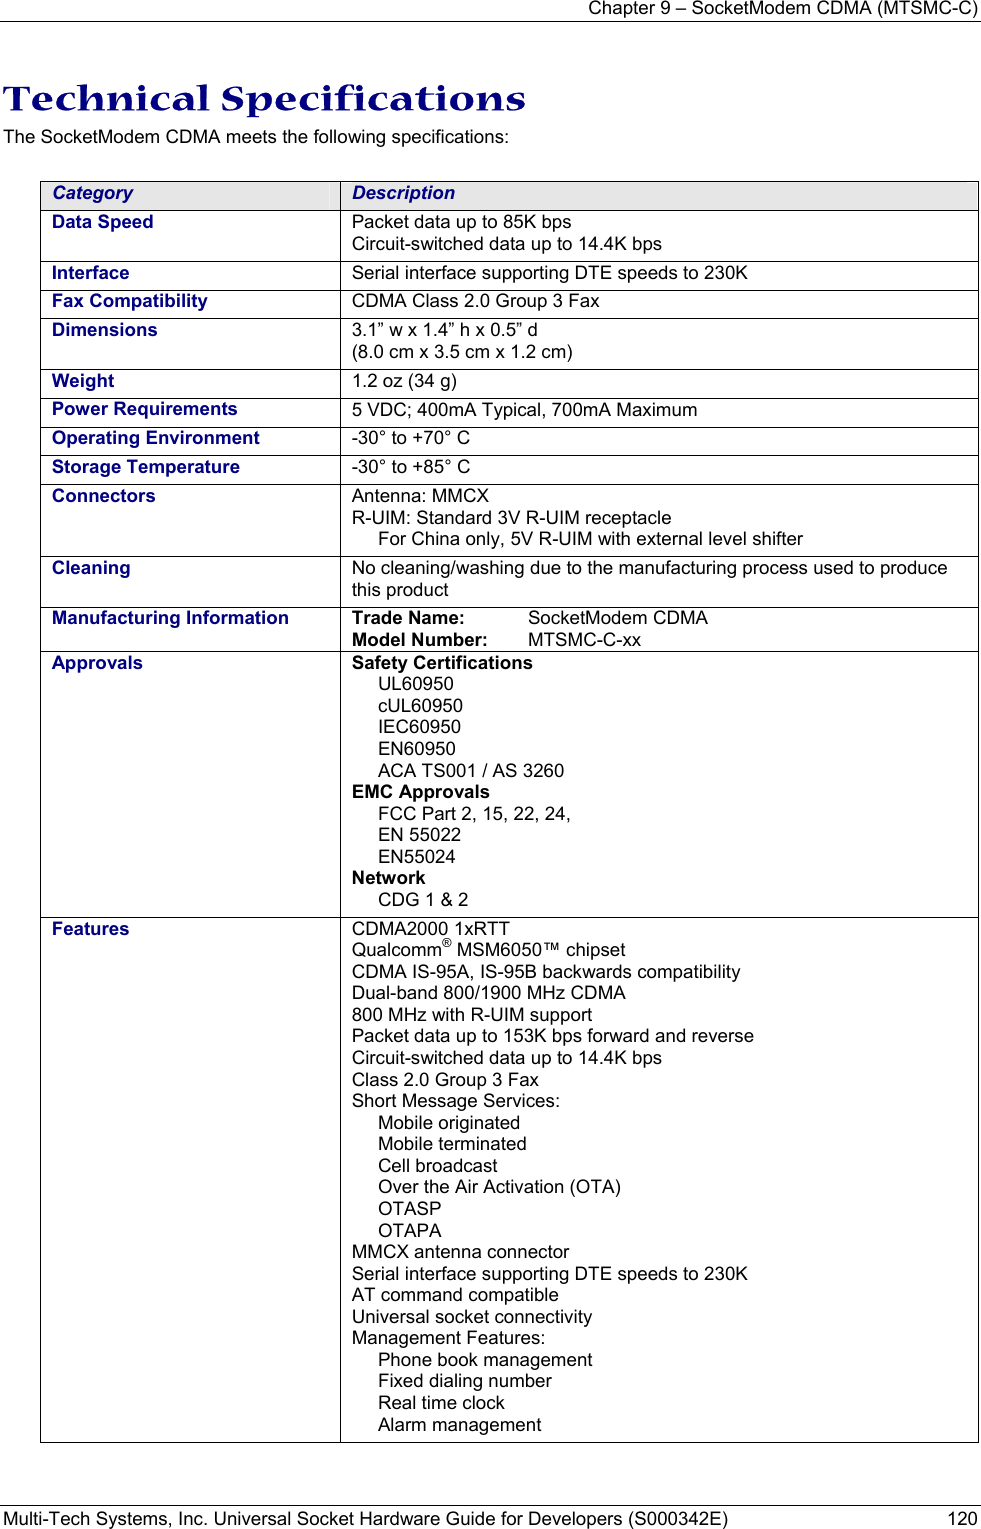 Chapter 9 – SocketModem CDMA (MTSMC-C) Multi-Tech Systems, Inc. Universal Socket Hardware Guide for Developers (S000342E)  120  Technical Specifications The SocketModem CDMA meets the following specifications:   Category  Description Data Speed  Packet data up to 85K bps Circuit-switched data up to 14.4K bps Interface  Serial interface supporting DTE speeds to 230K Fax Compatibility  CDMA Class 2.0 Group 3 Fax Dimensions  3.1” w x 1.4” h x 0.5” d (8.0 cm x 3.5 cm x 1.2 cm) Weight  1.2 oz (34 g) Power Requirements  5 VDC; 400mA Typical, 700mA Maximum Operating Environment  -30° to +70° C  Storage Temperature  -30° to +85° C    Connectors  Antenna: MMCX R-UIM: Standard 3V R-UIM receptacle  For China only, 5V R-UIM with external level shifter Cleaning   No cleaning/washing due to the manufacturing process used to produce this product Manufacturing Information  Trade Name: SocketModem CDMA Model Number: MTSMC-C-xx Approvals  Safety Certifications UL60950 cUL60950 IEC60950 EN60950 ACA TS001 / AS 3260 EMC Approvals FCC Part 2, 15, 22, 24,  EN 55022  EN55024 Network CDG 1 &amp; 2 Features  CDMA2000 1xRTT Qualcomm® MSM6050™ chipset CDMA IS-95A, IS-95B backwards compatibility Dual-band 800/1900 MHz CDMA 800 MHz with R-UIM support Packet data up to 153K bps forward and reverse Circuit-switched data up to 14.4K bps Class 2.0 Group 3 Fax Short Message Services: Mobile originated Mobile terminated Cell broadcast Over the Air Activation (OTA) OTASP OTAPA MMCX antenna connector Serial interface supporting DTE speeds to 230K AT command compatible Universal socket connectivity Management Features: Phone book management Fixed dialing number Real time clock Alarm management   